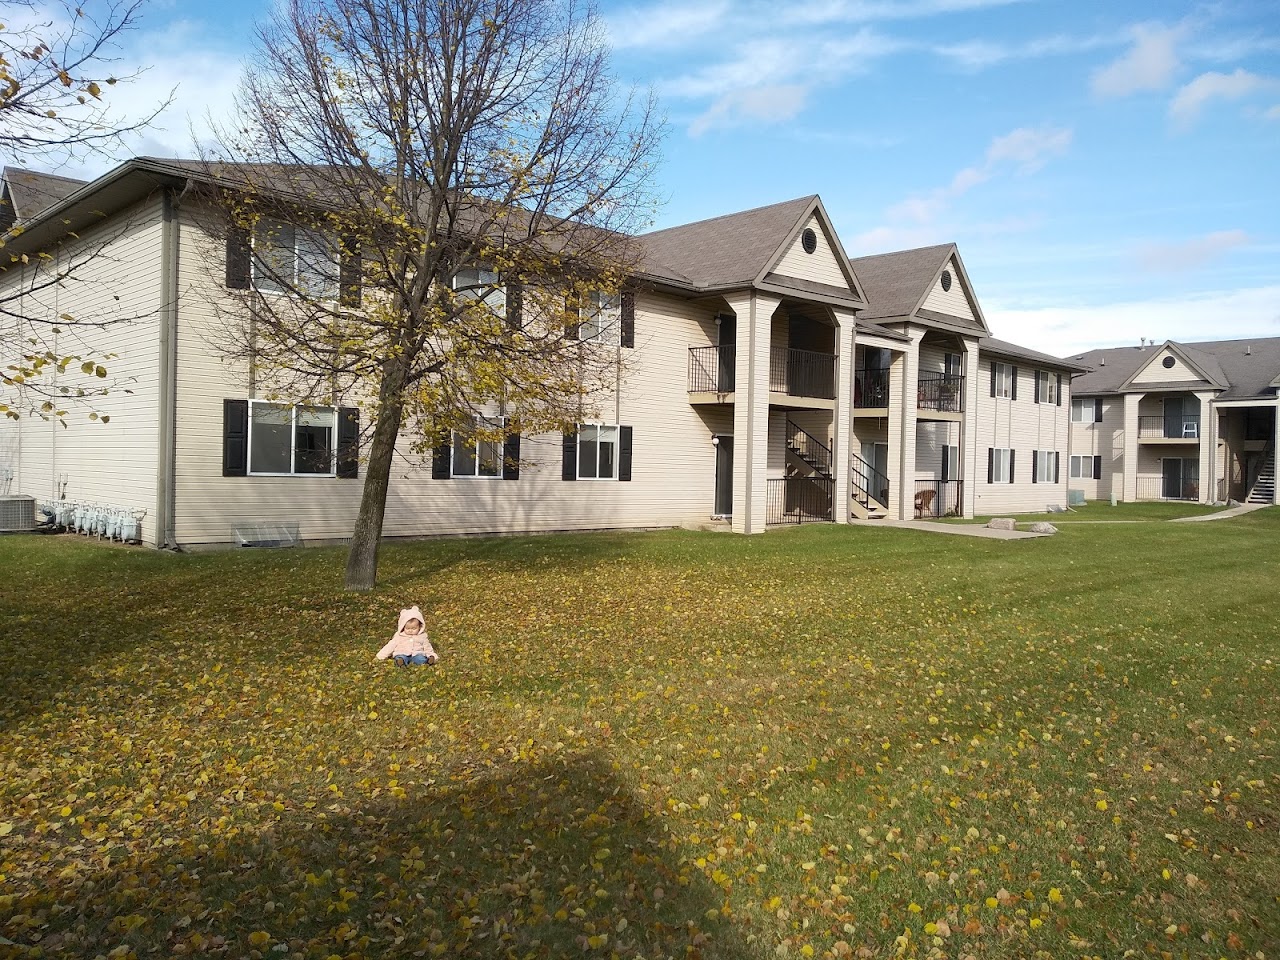 Photo of PARK WEST CLUB. Affordable housing located at 1733 REYNARD DR MONROE, MI 48162